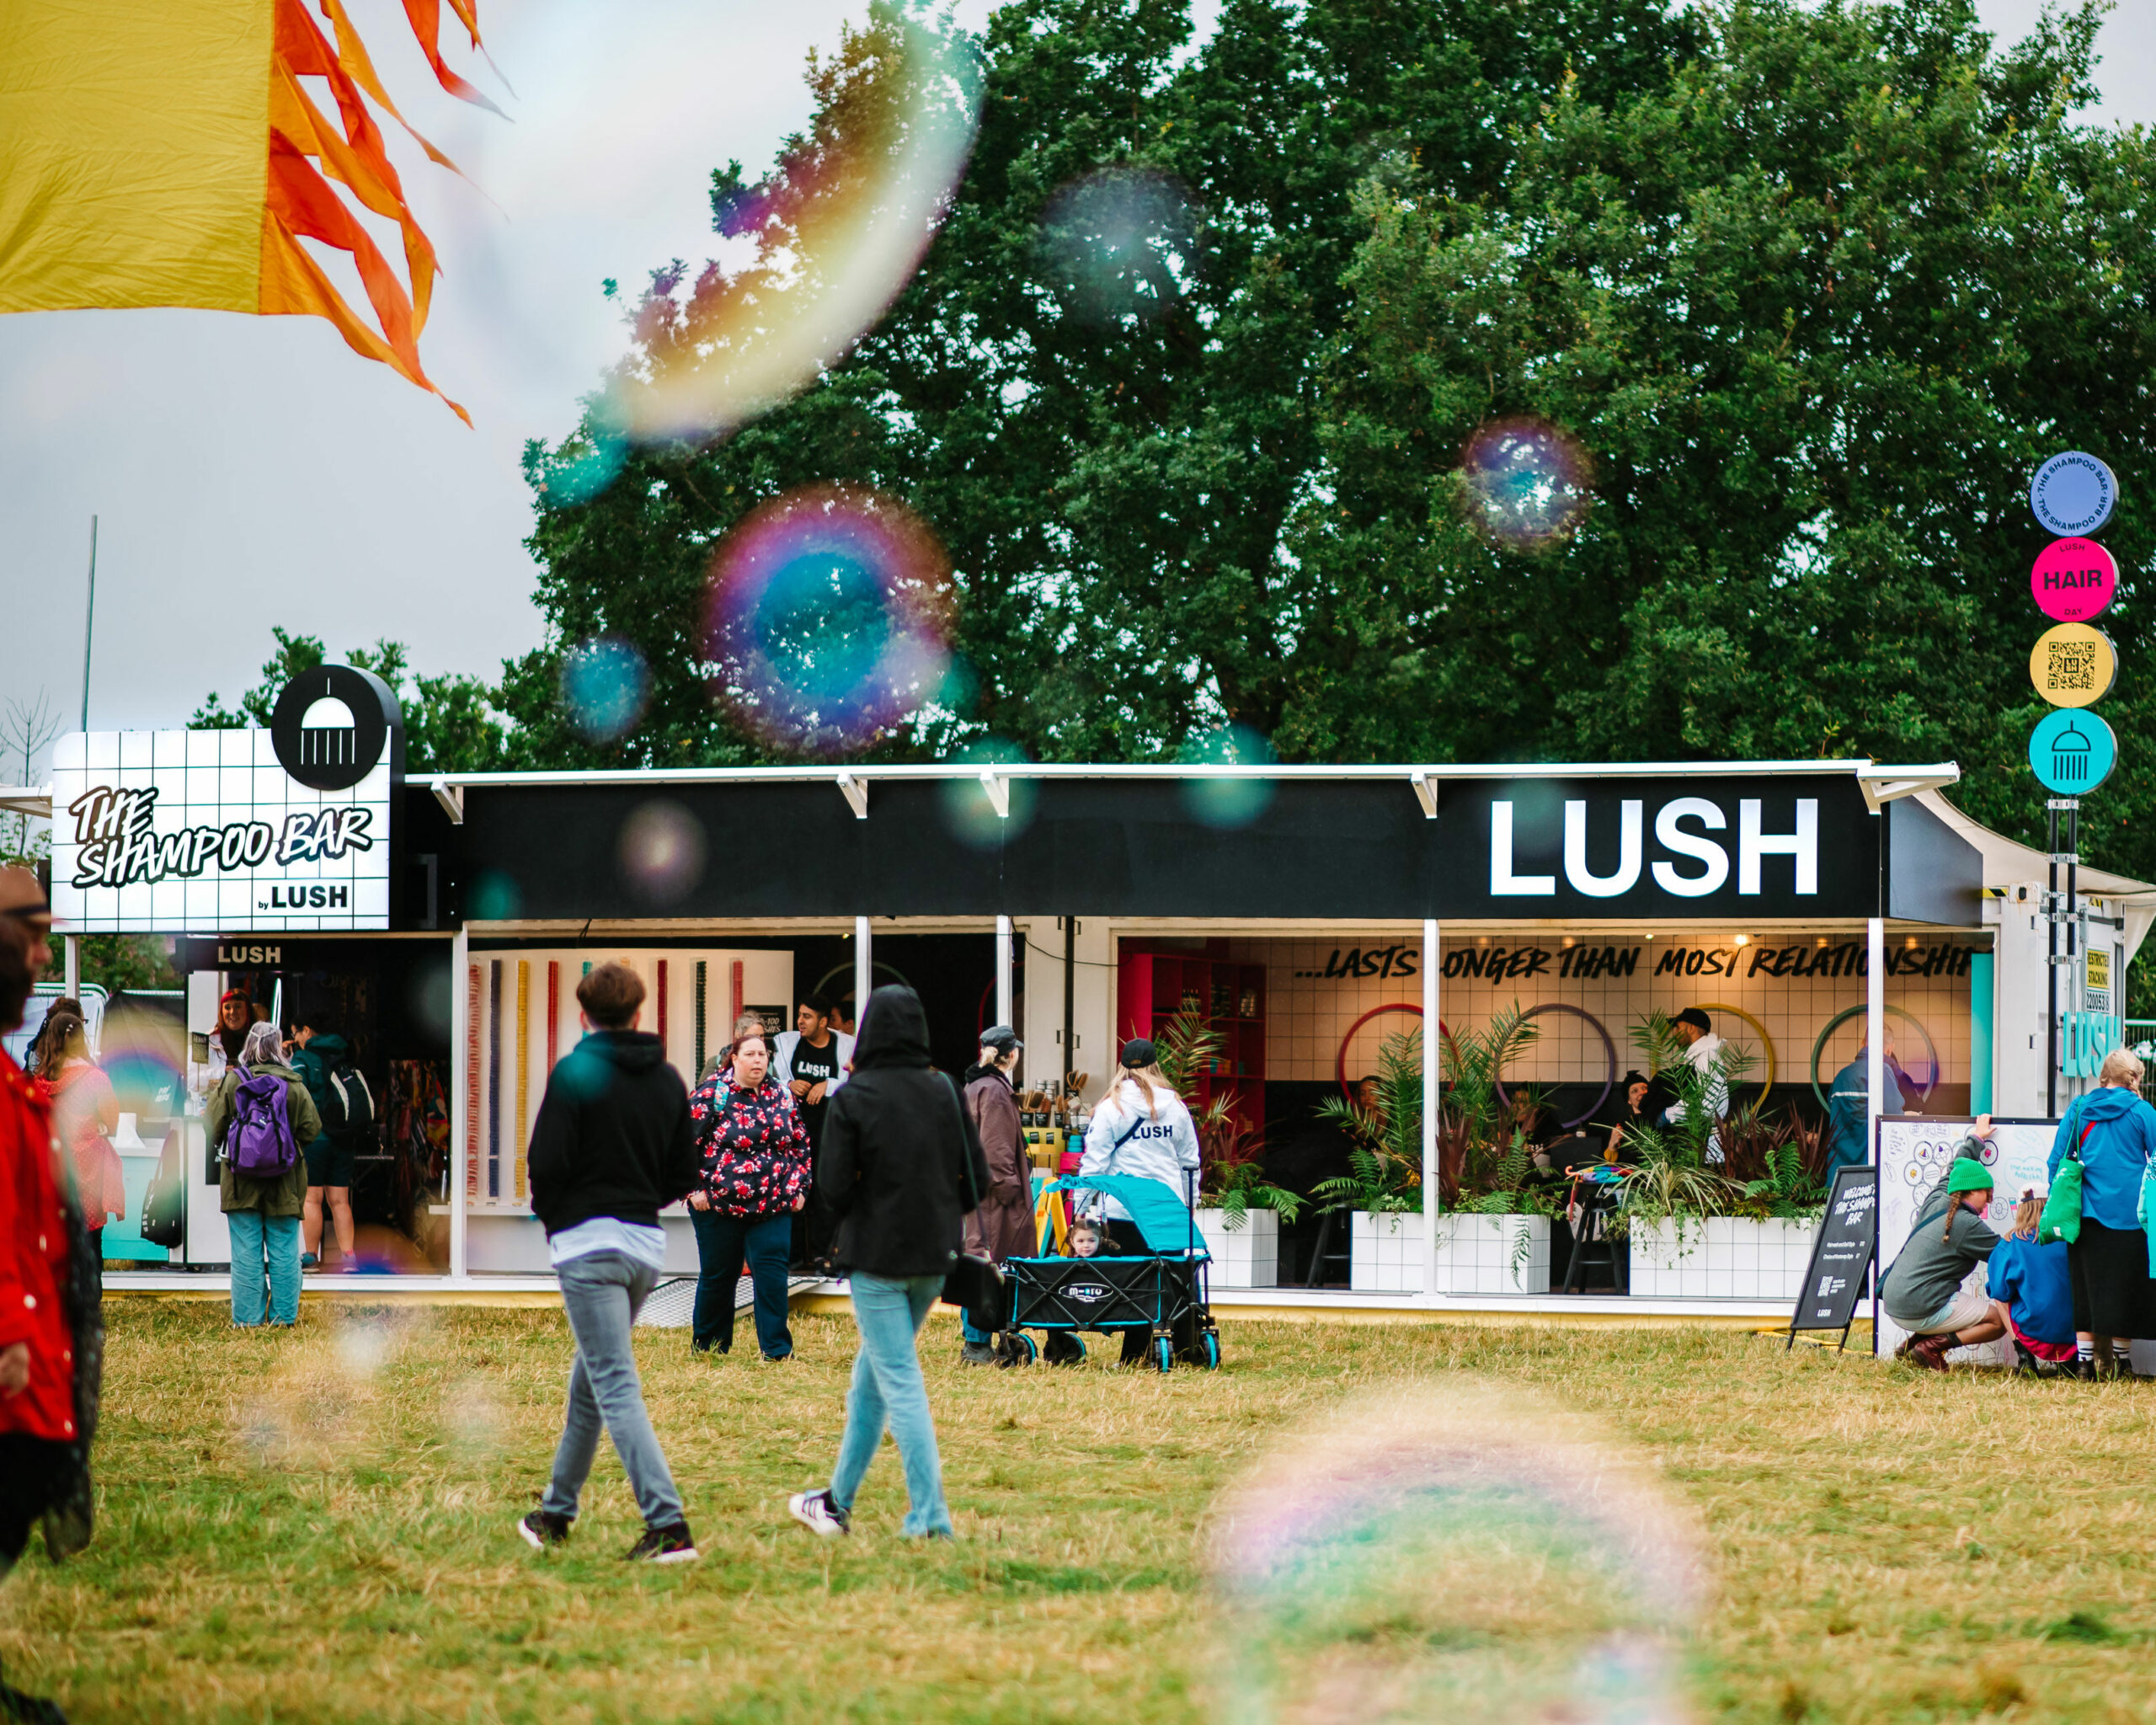 Lush-pop-up-salon-full-view-with-bubbles